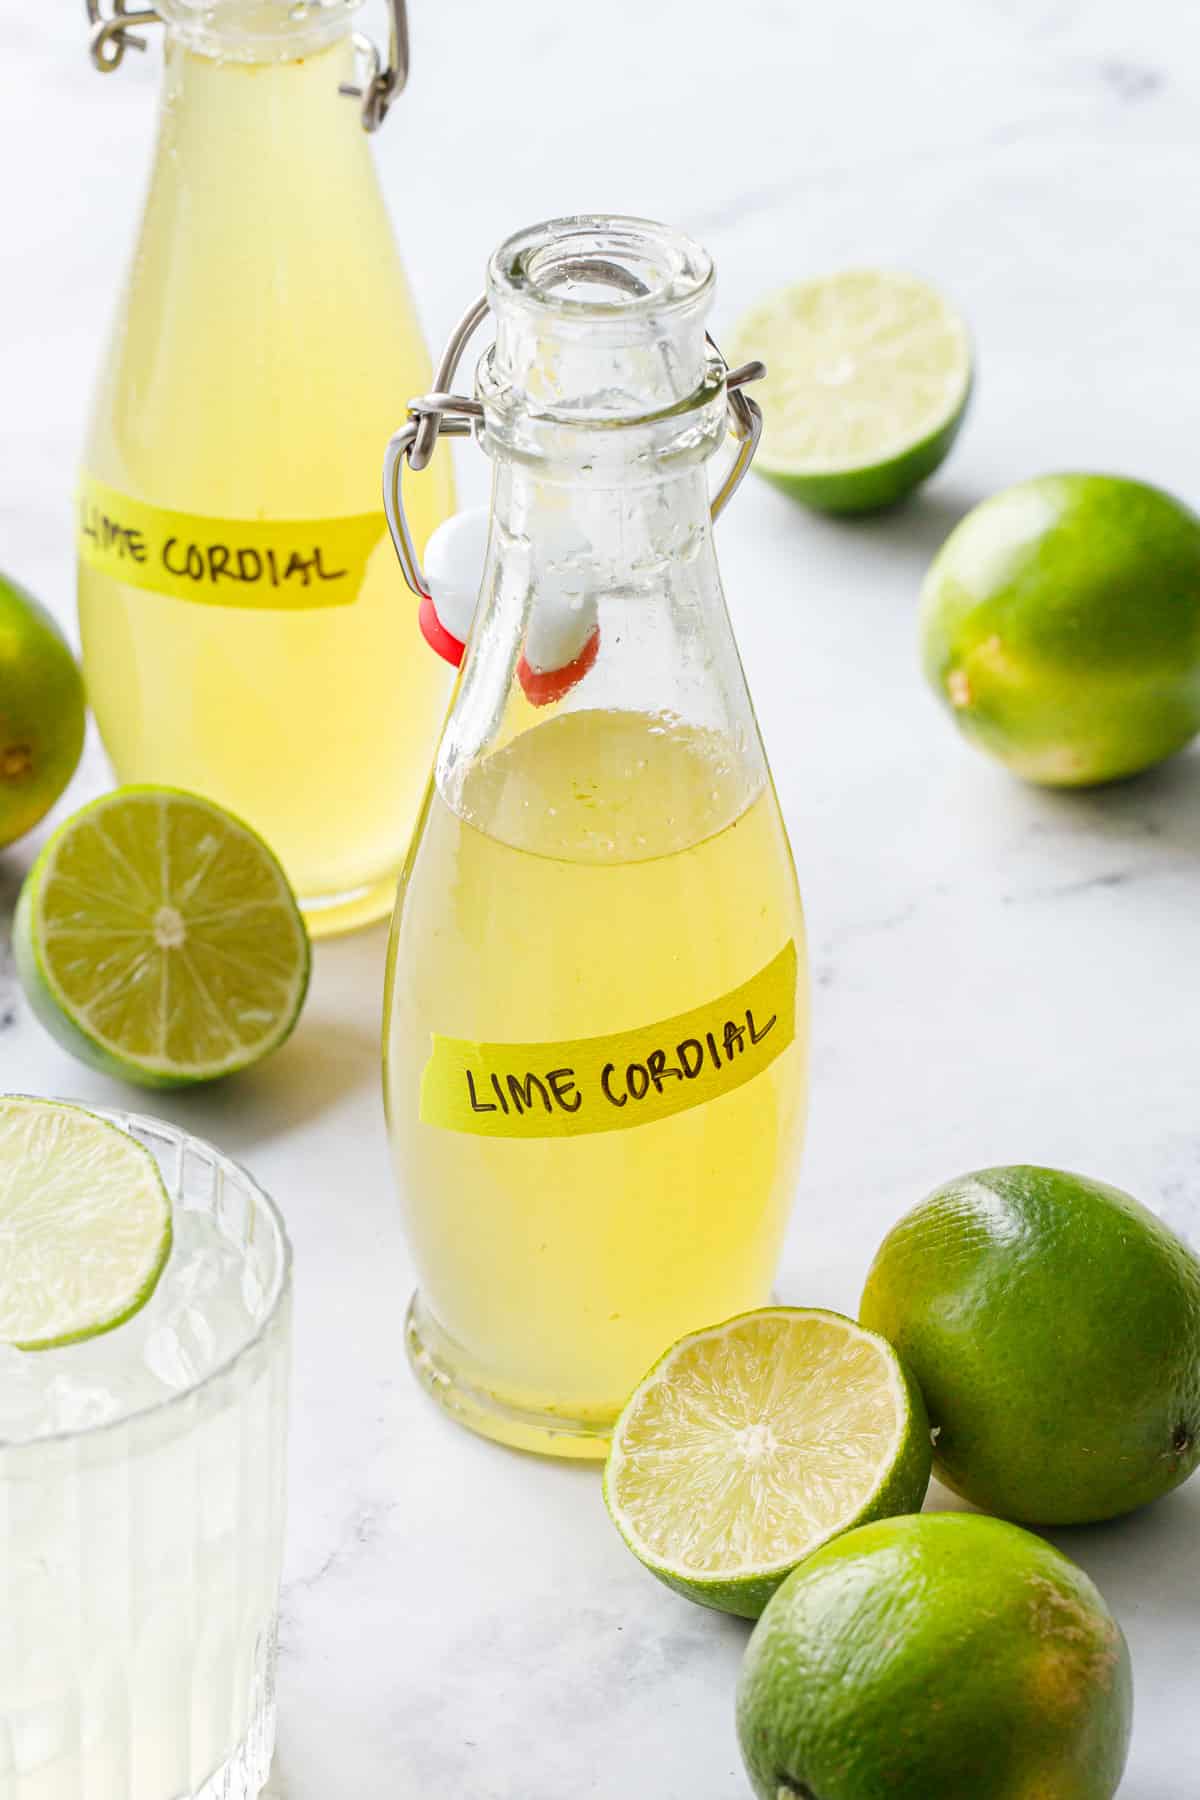 Swing-top bottles filled with Homemade Lime Cordial, labeled with green tape, with fresh limes scattered around.